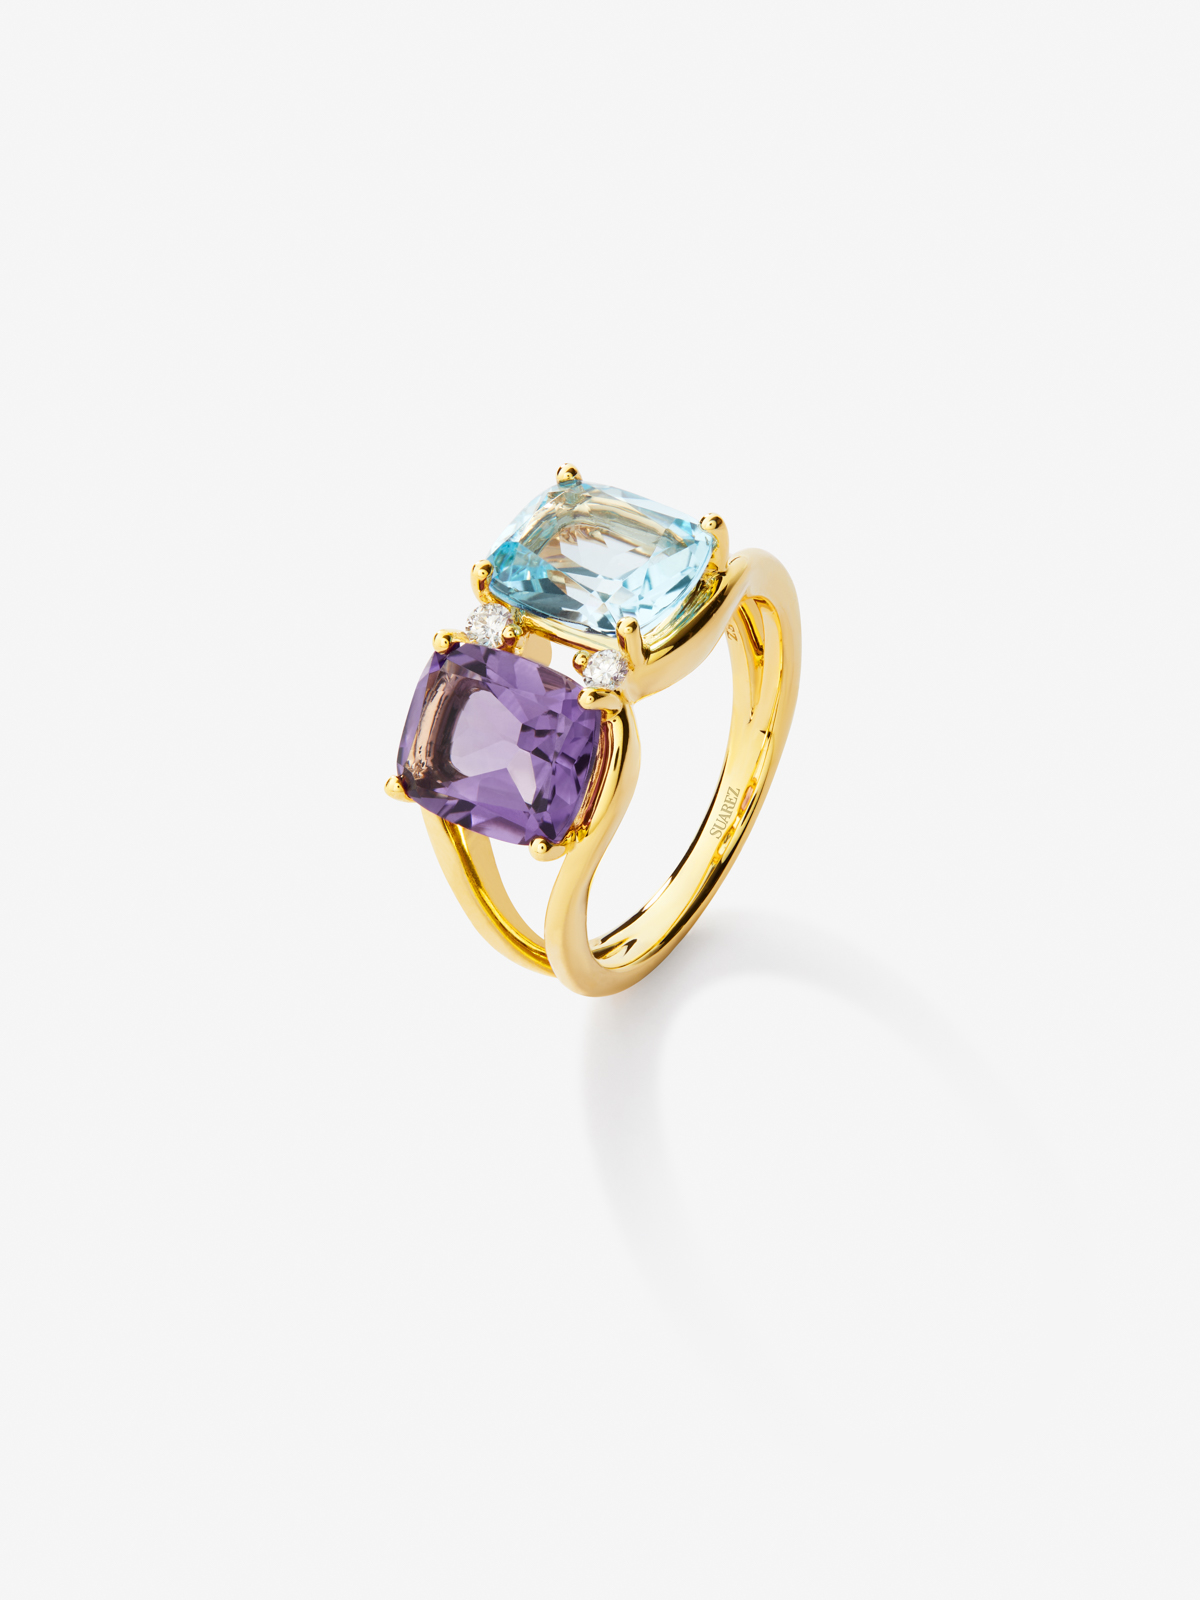 18kt yellow gold ring with diamonds, Sky and amethyst topacios